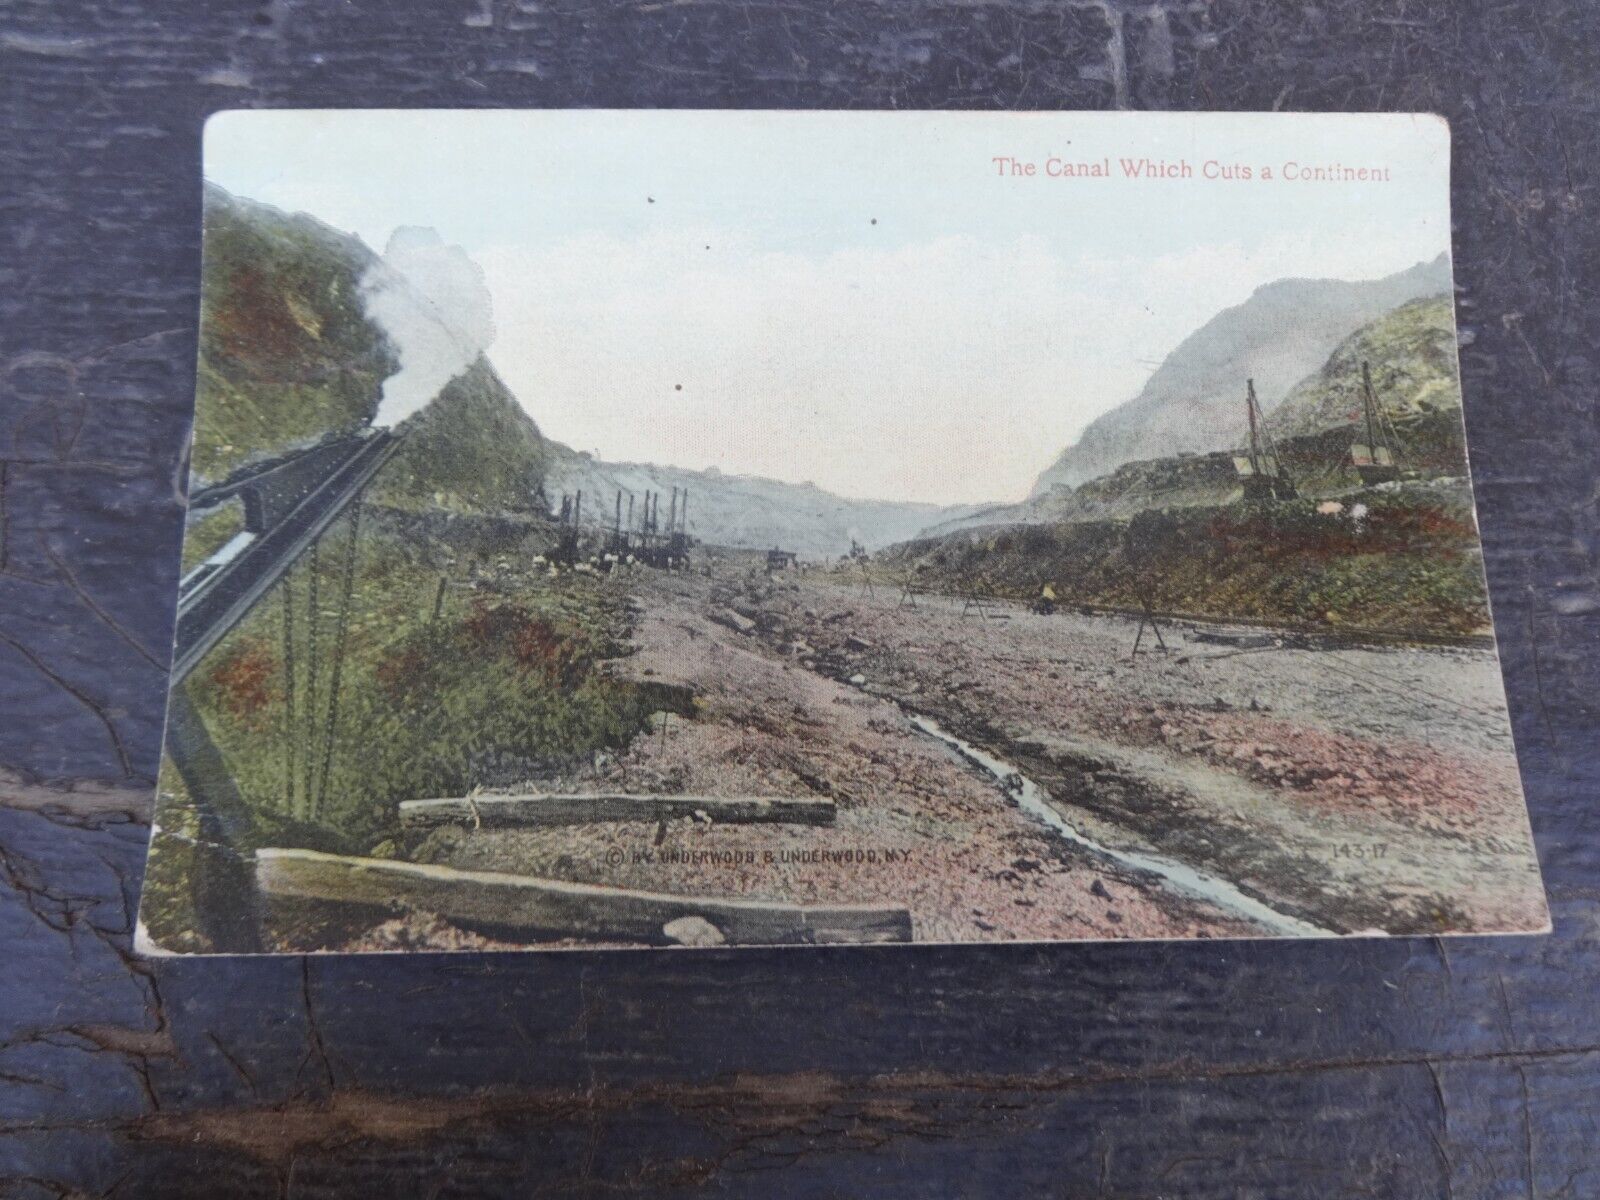 1915 POSTCARD PANAMA THE CANAL WHICH CUTS A CONTINENT PHOTO BY UNDERWOOD